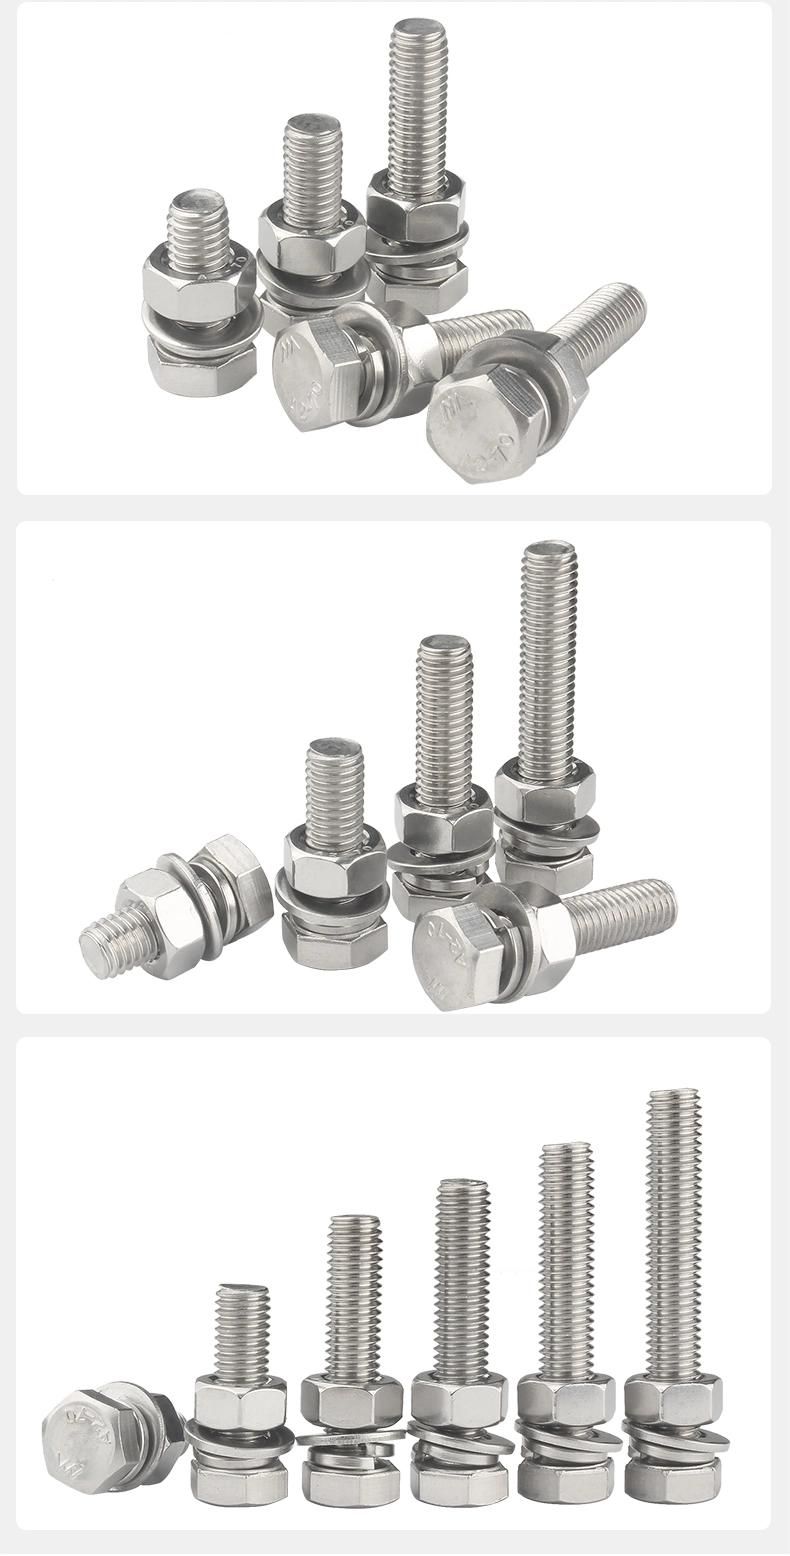 Factory Stock Stainless Steel A2 A4 DIN931 Partial Half Thread Hex Bolt and Nut and Washer